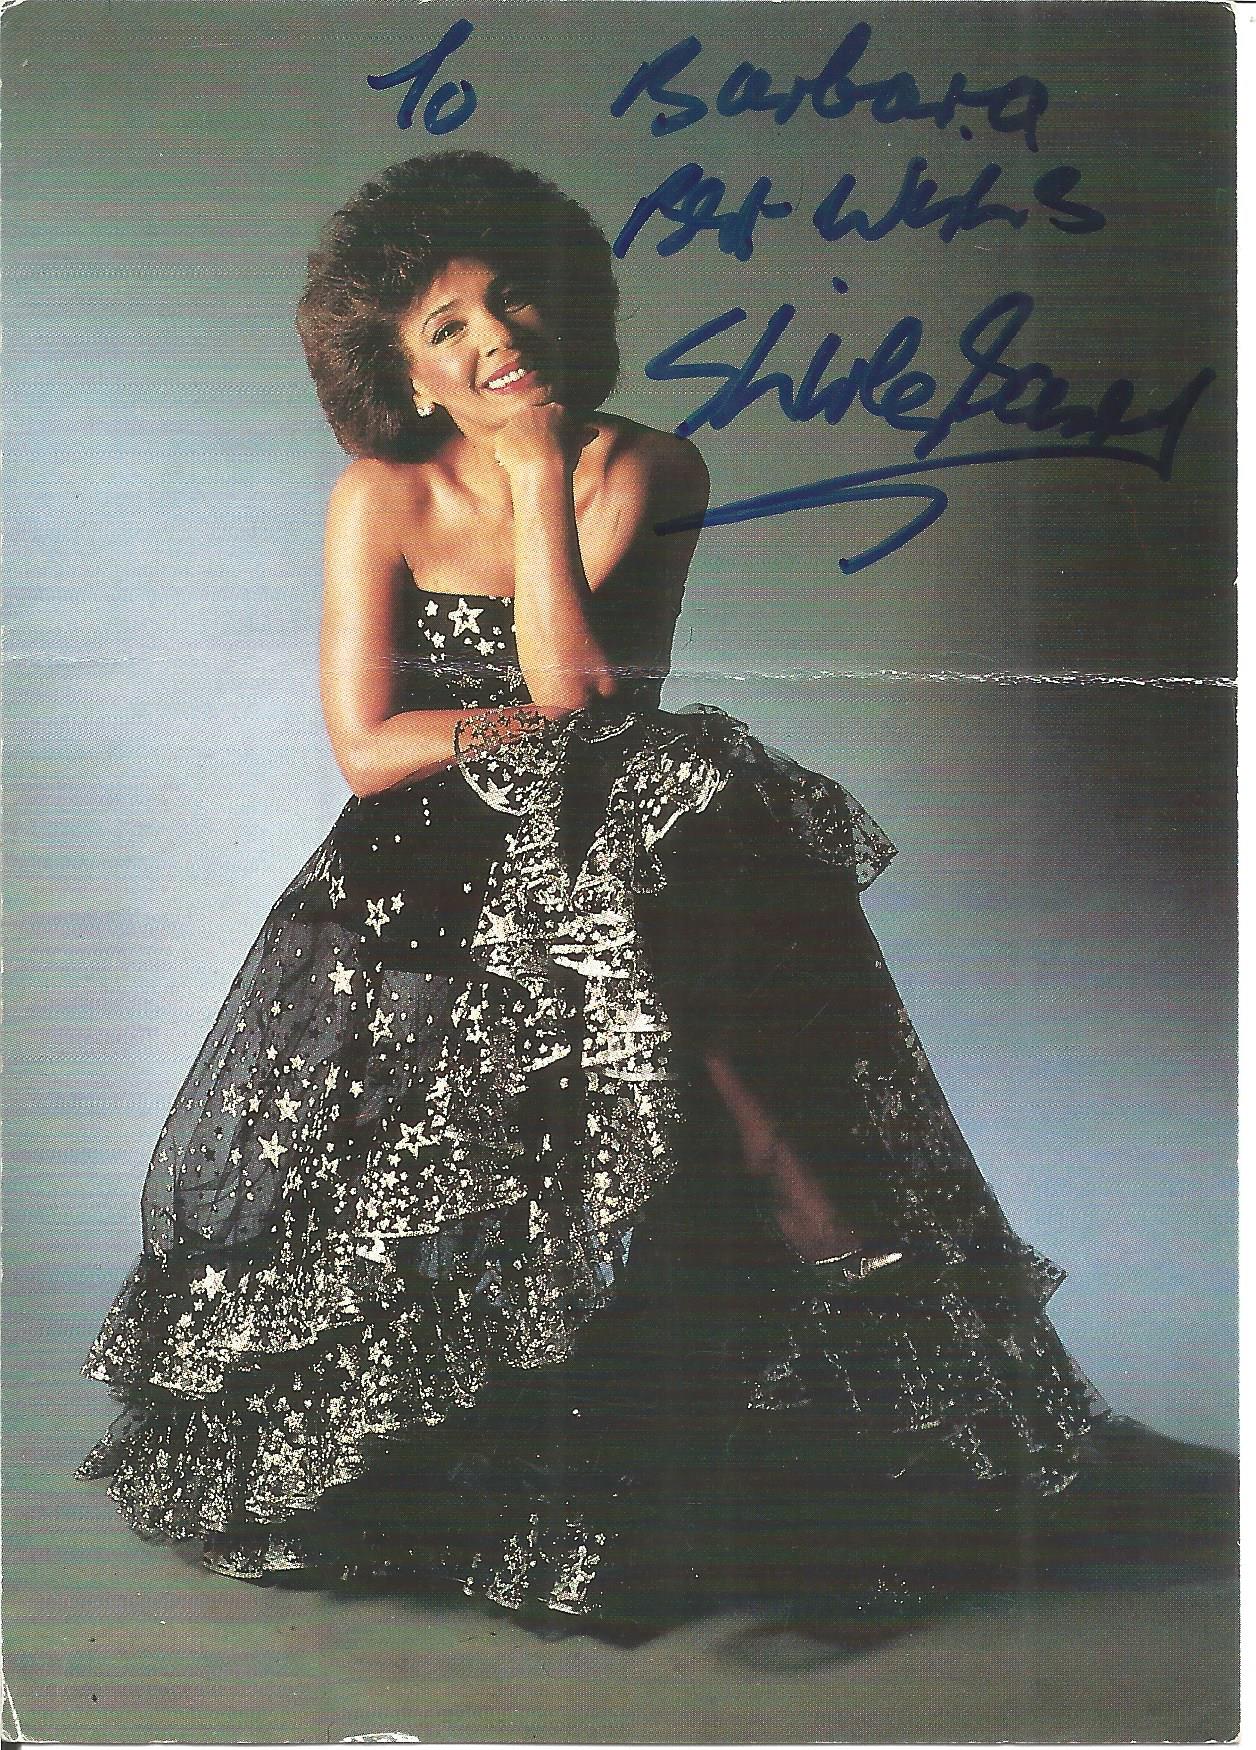 Shirley Bassey signed 6 x 4 inch colour photo. Slight fold mark. Dedicated. Good Condition. All